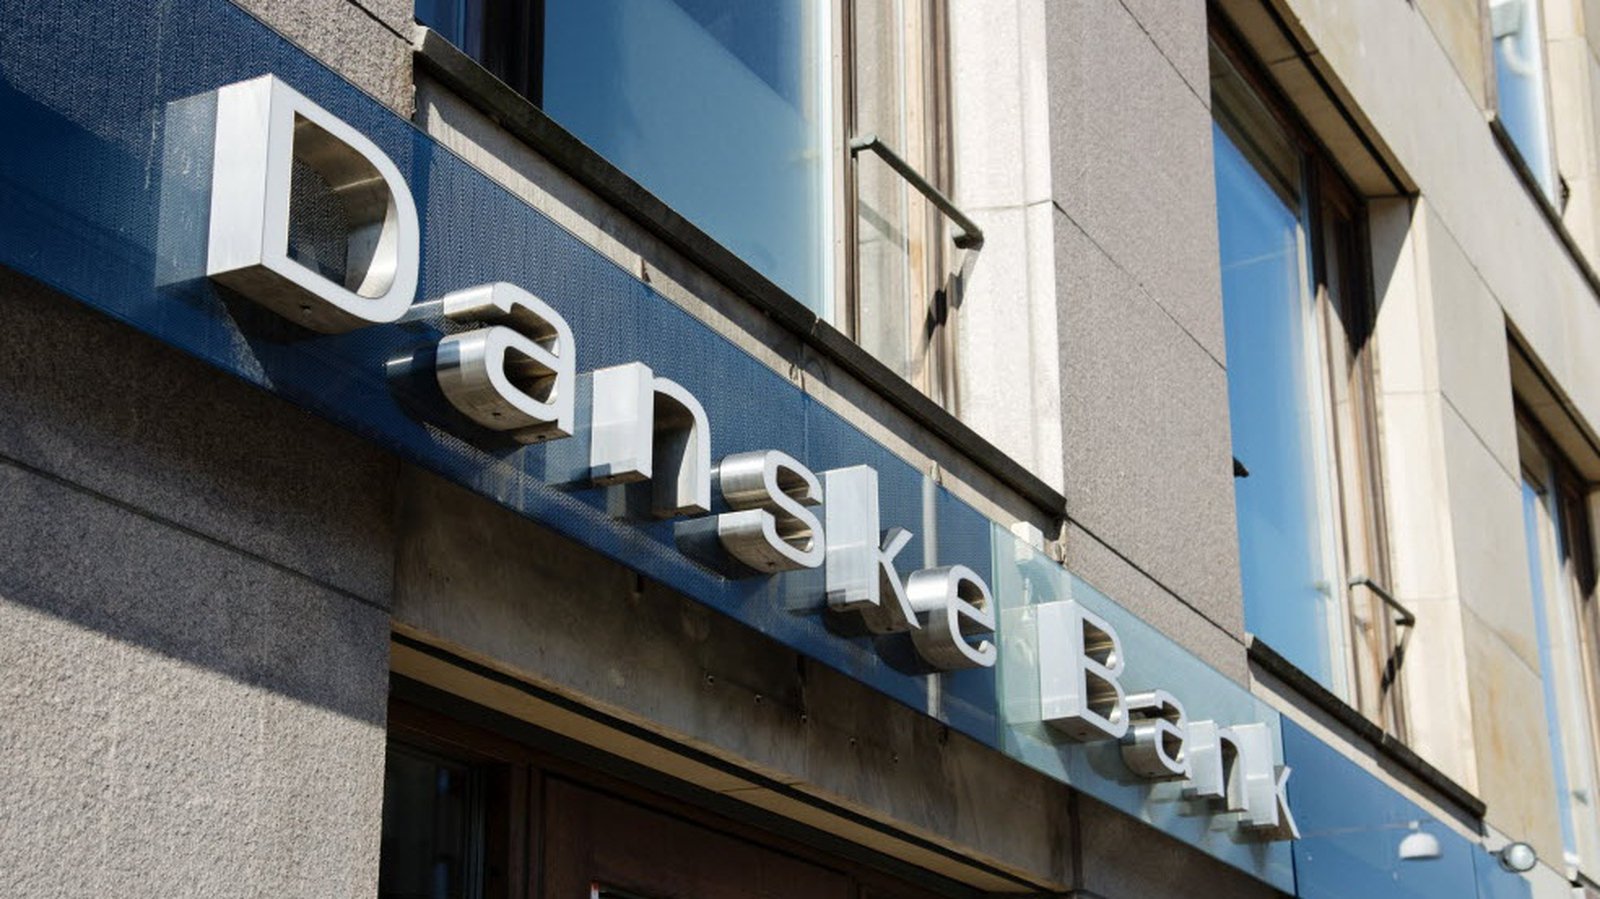 Danske Bank staff to get pay rise of 6.2% in 2023